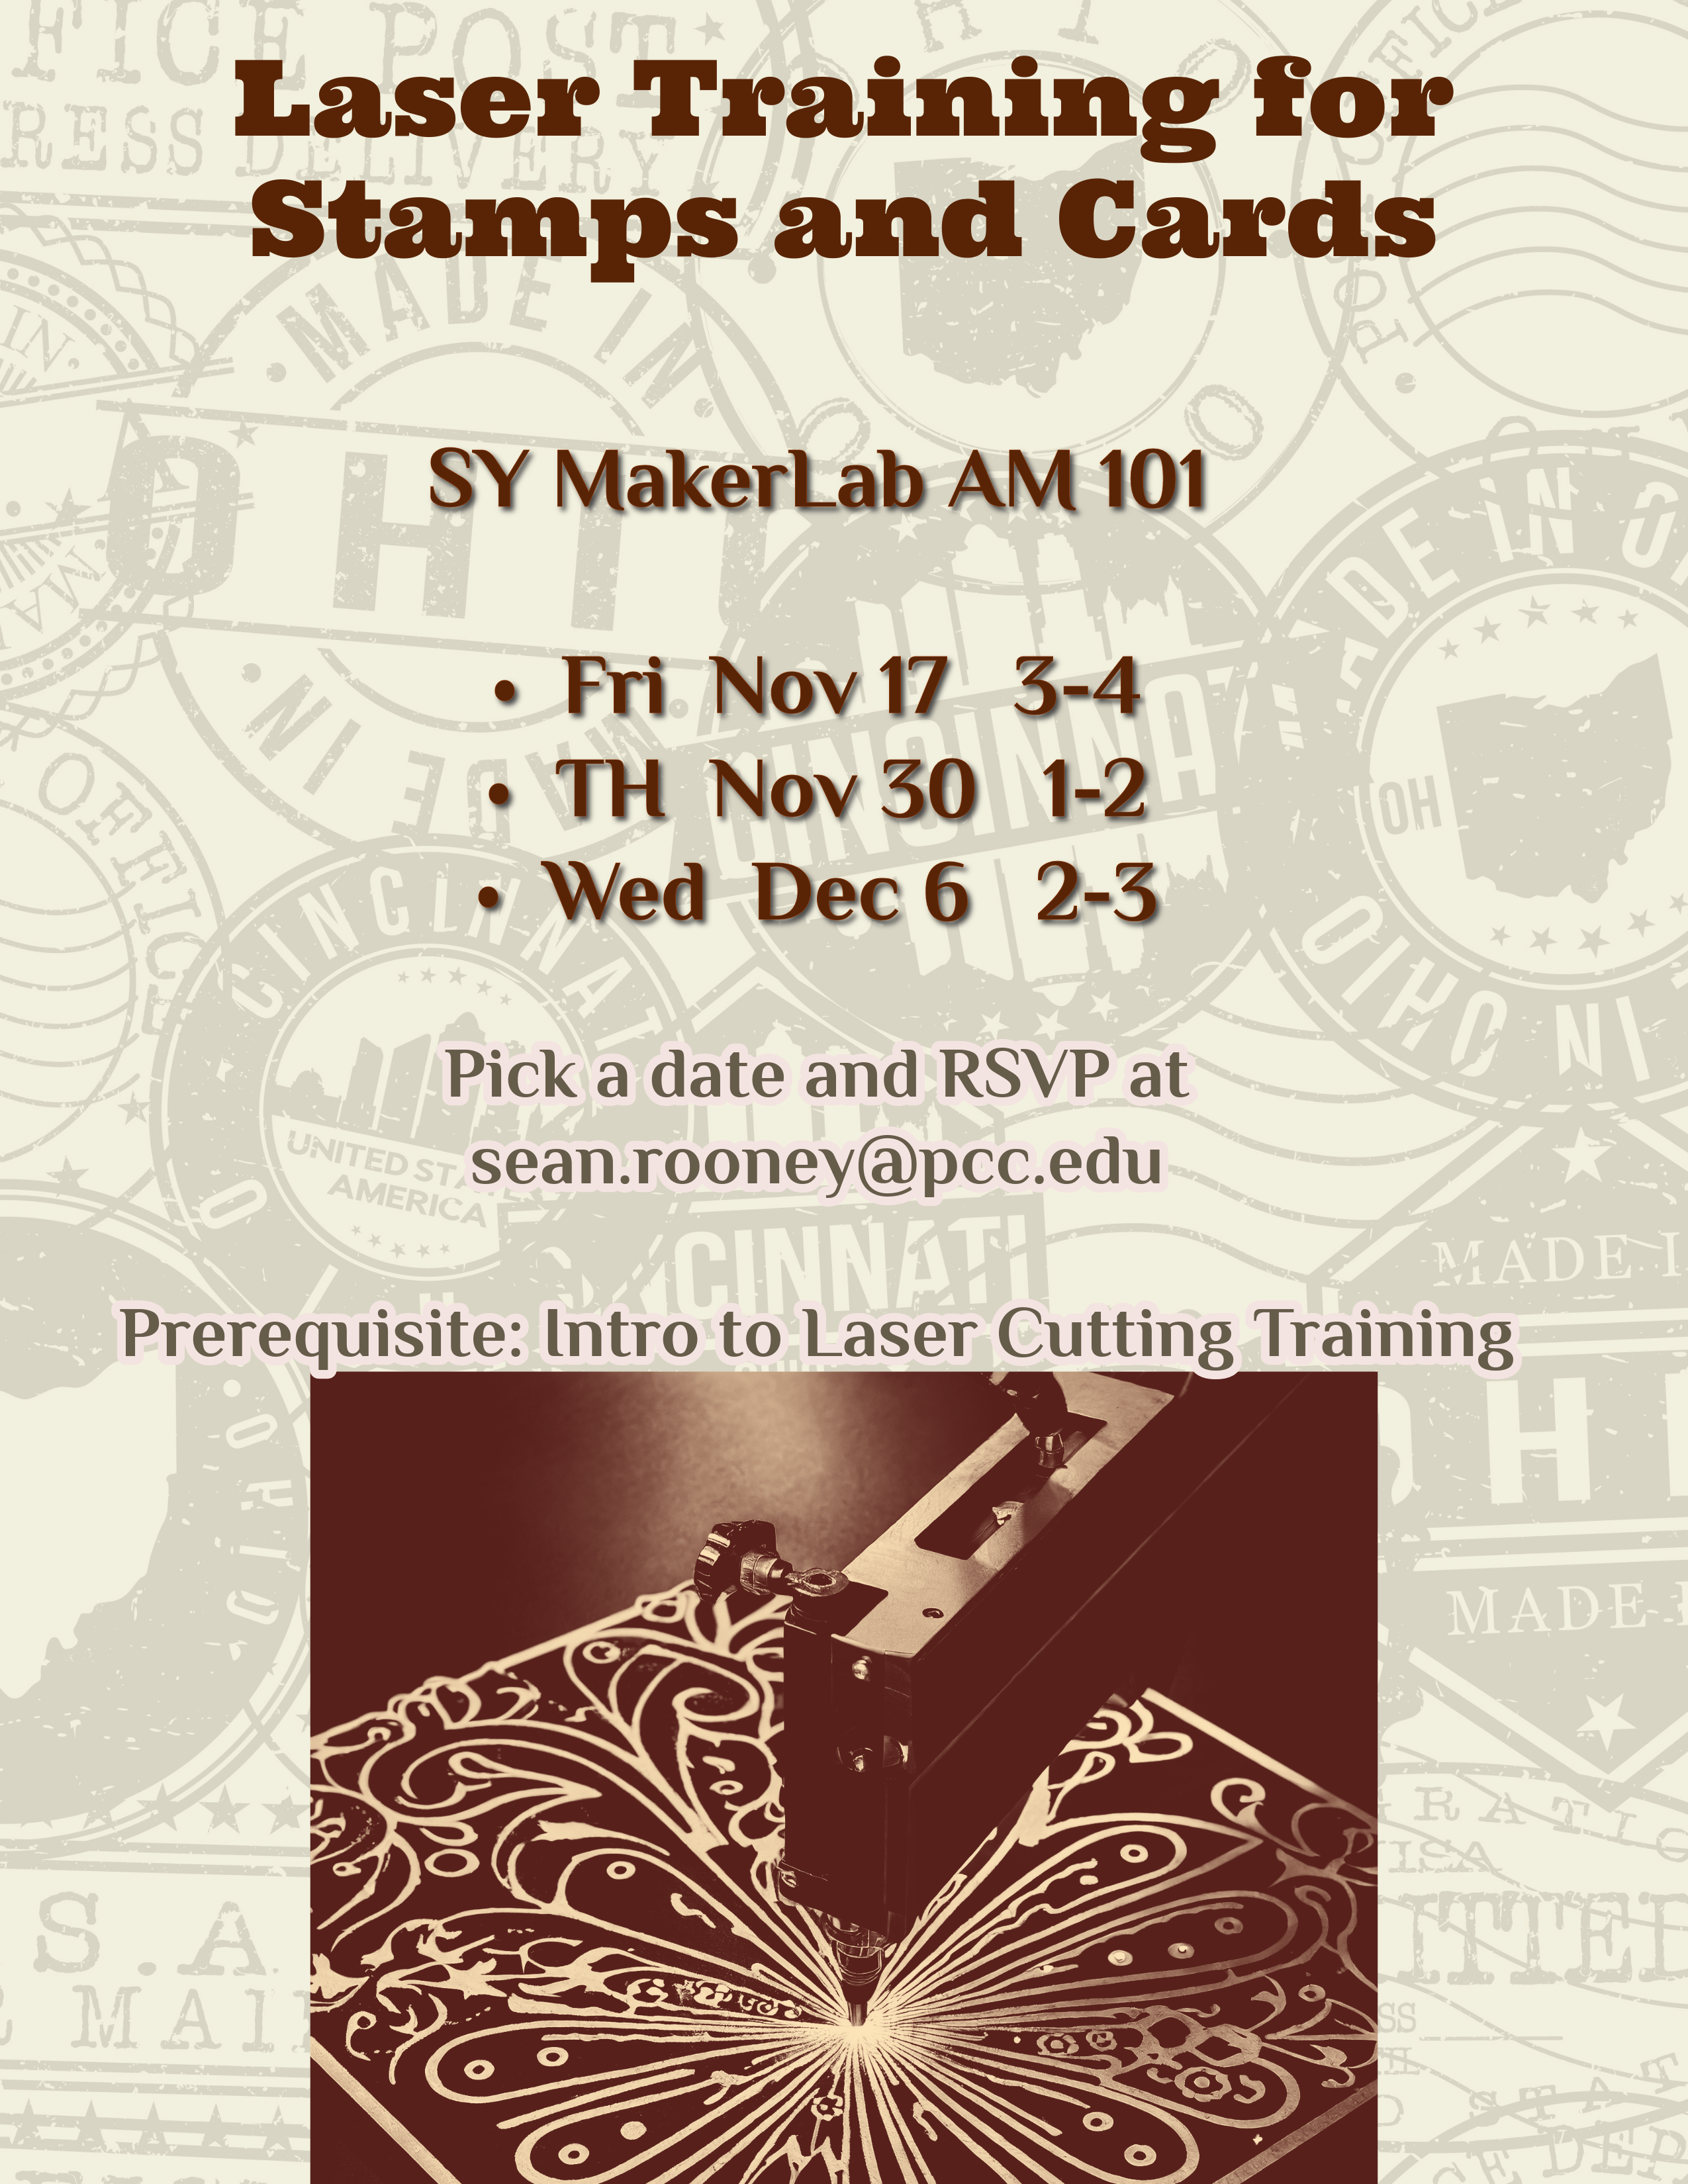 Laser Training for Stamps and Cards

Location: SY MakerLab AM 101

Dates:
Fri  Nov 17   3-4    
TH  Nov 30   1-2
Wed  Dec 6   2-3   

Pick a date and RSVP at sean.rooney@pcc.edu
Prerequisite: Intro to Laser Cutting Training